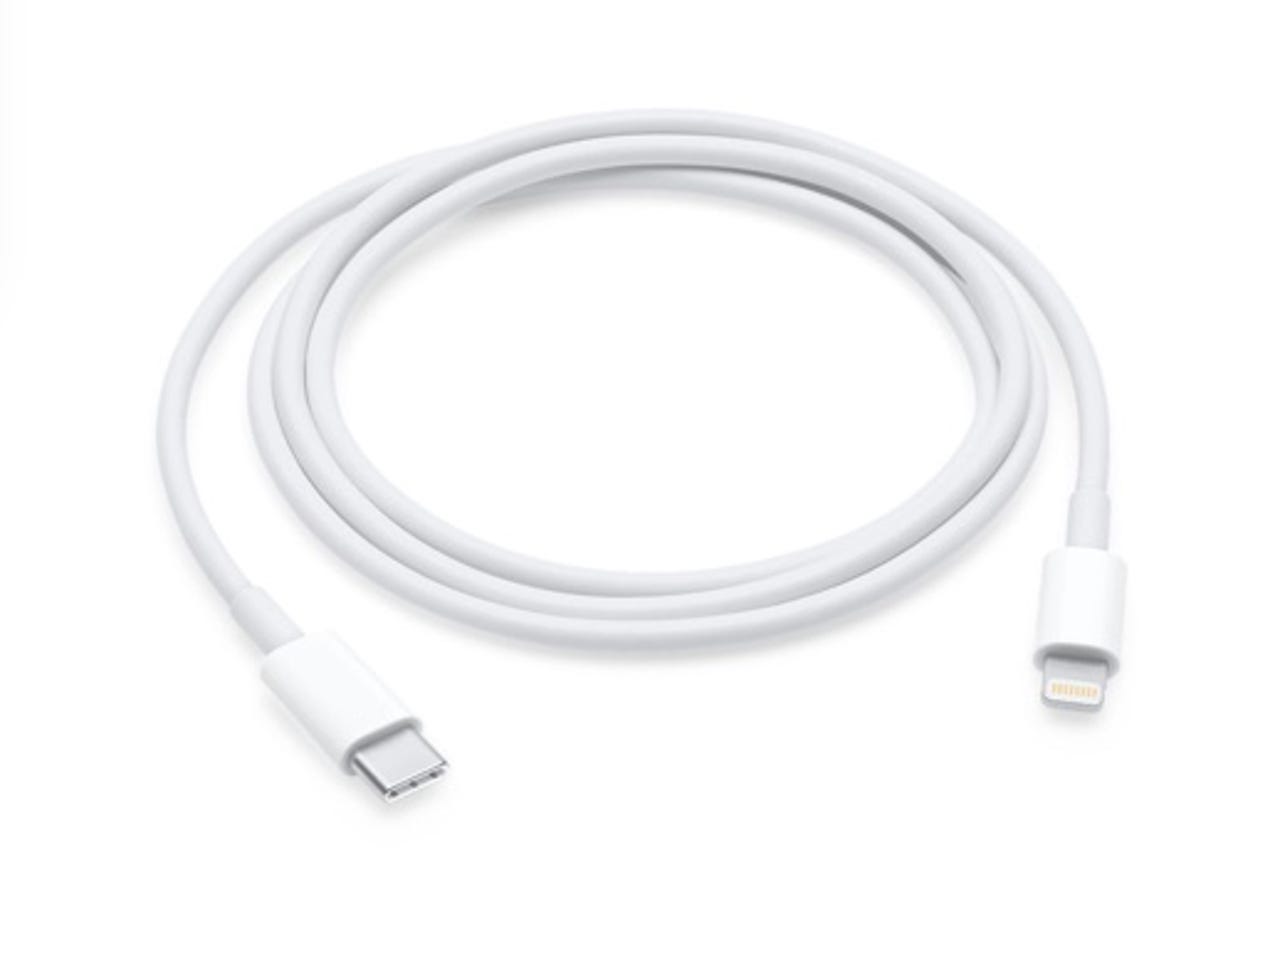 Apple 1-meter USB-C to Lightning cable